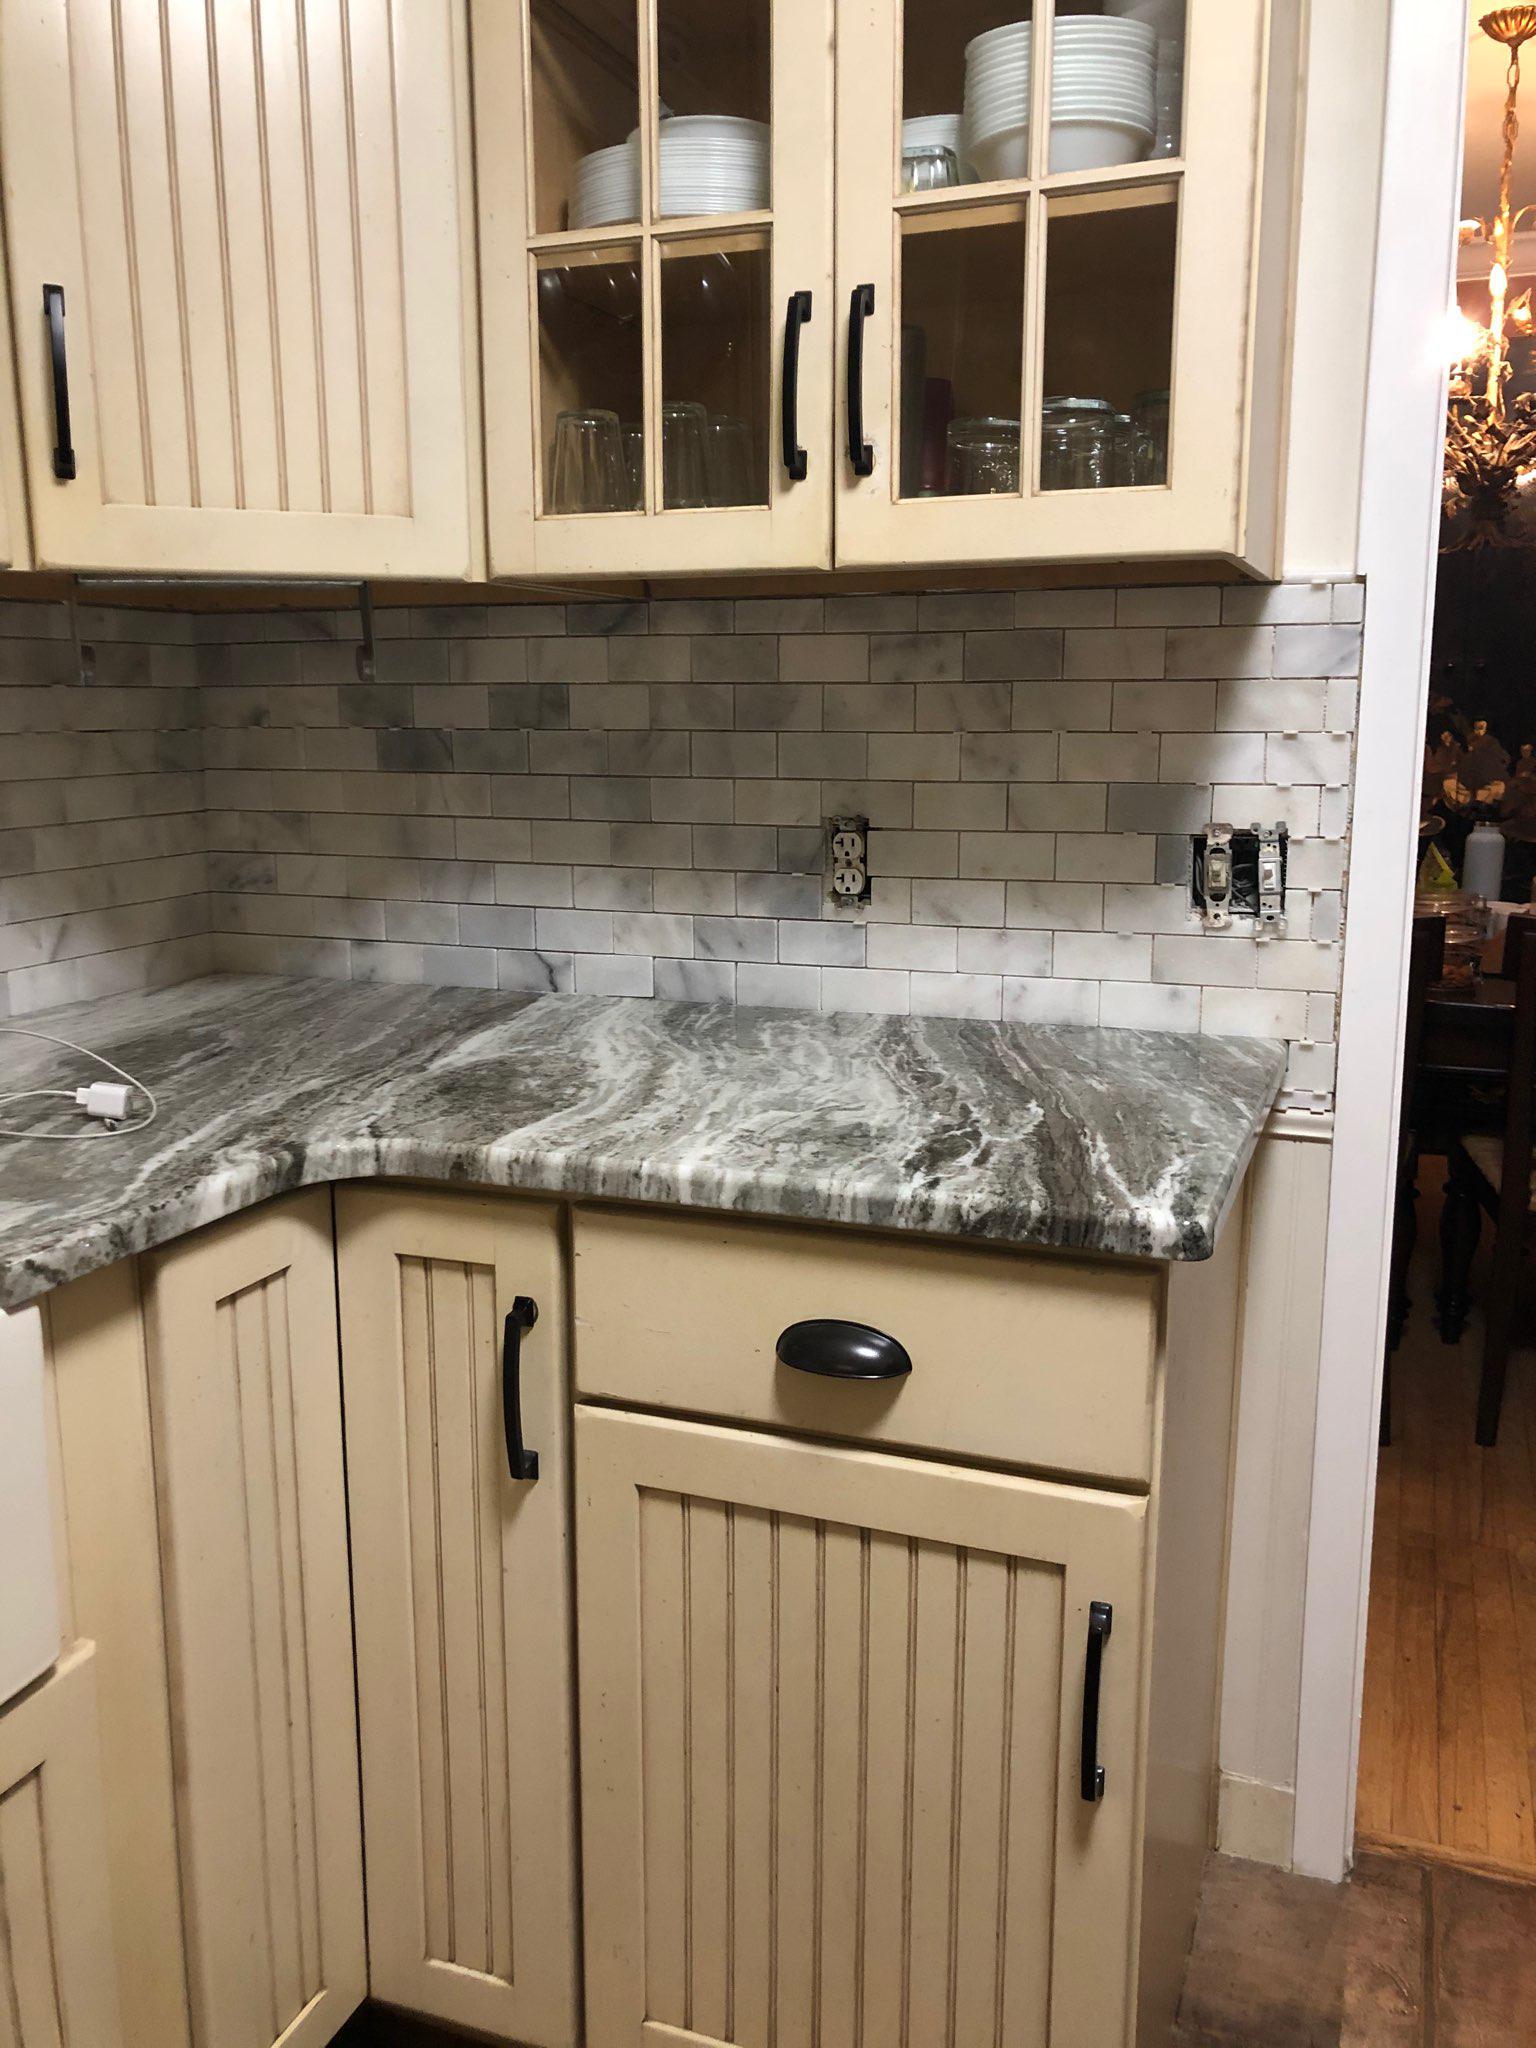 This Tempe job finished up last week. We installed Backsplash in this home. It makes such a huge difference in this house! Call Home Solutionz Today For Your Flooring Project <(623) 289-3880>. Home Solutionz - Tempe is Licensed, Bonded, and Insured. Home Solutionz offers 12 - 24 Months 0% Financing Through Wells Fargo. Home Solutionz Tempe - 3125 S 52nd St, Suite 107 Tempe, AZ 85282 United States  Backsplash  BacksplashReplacement